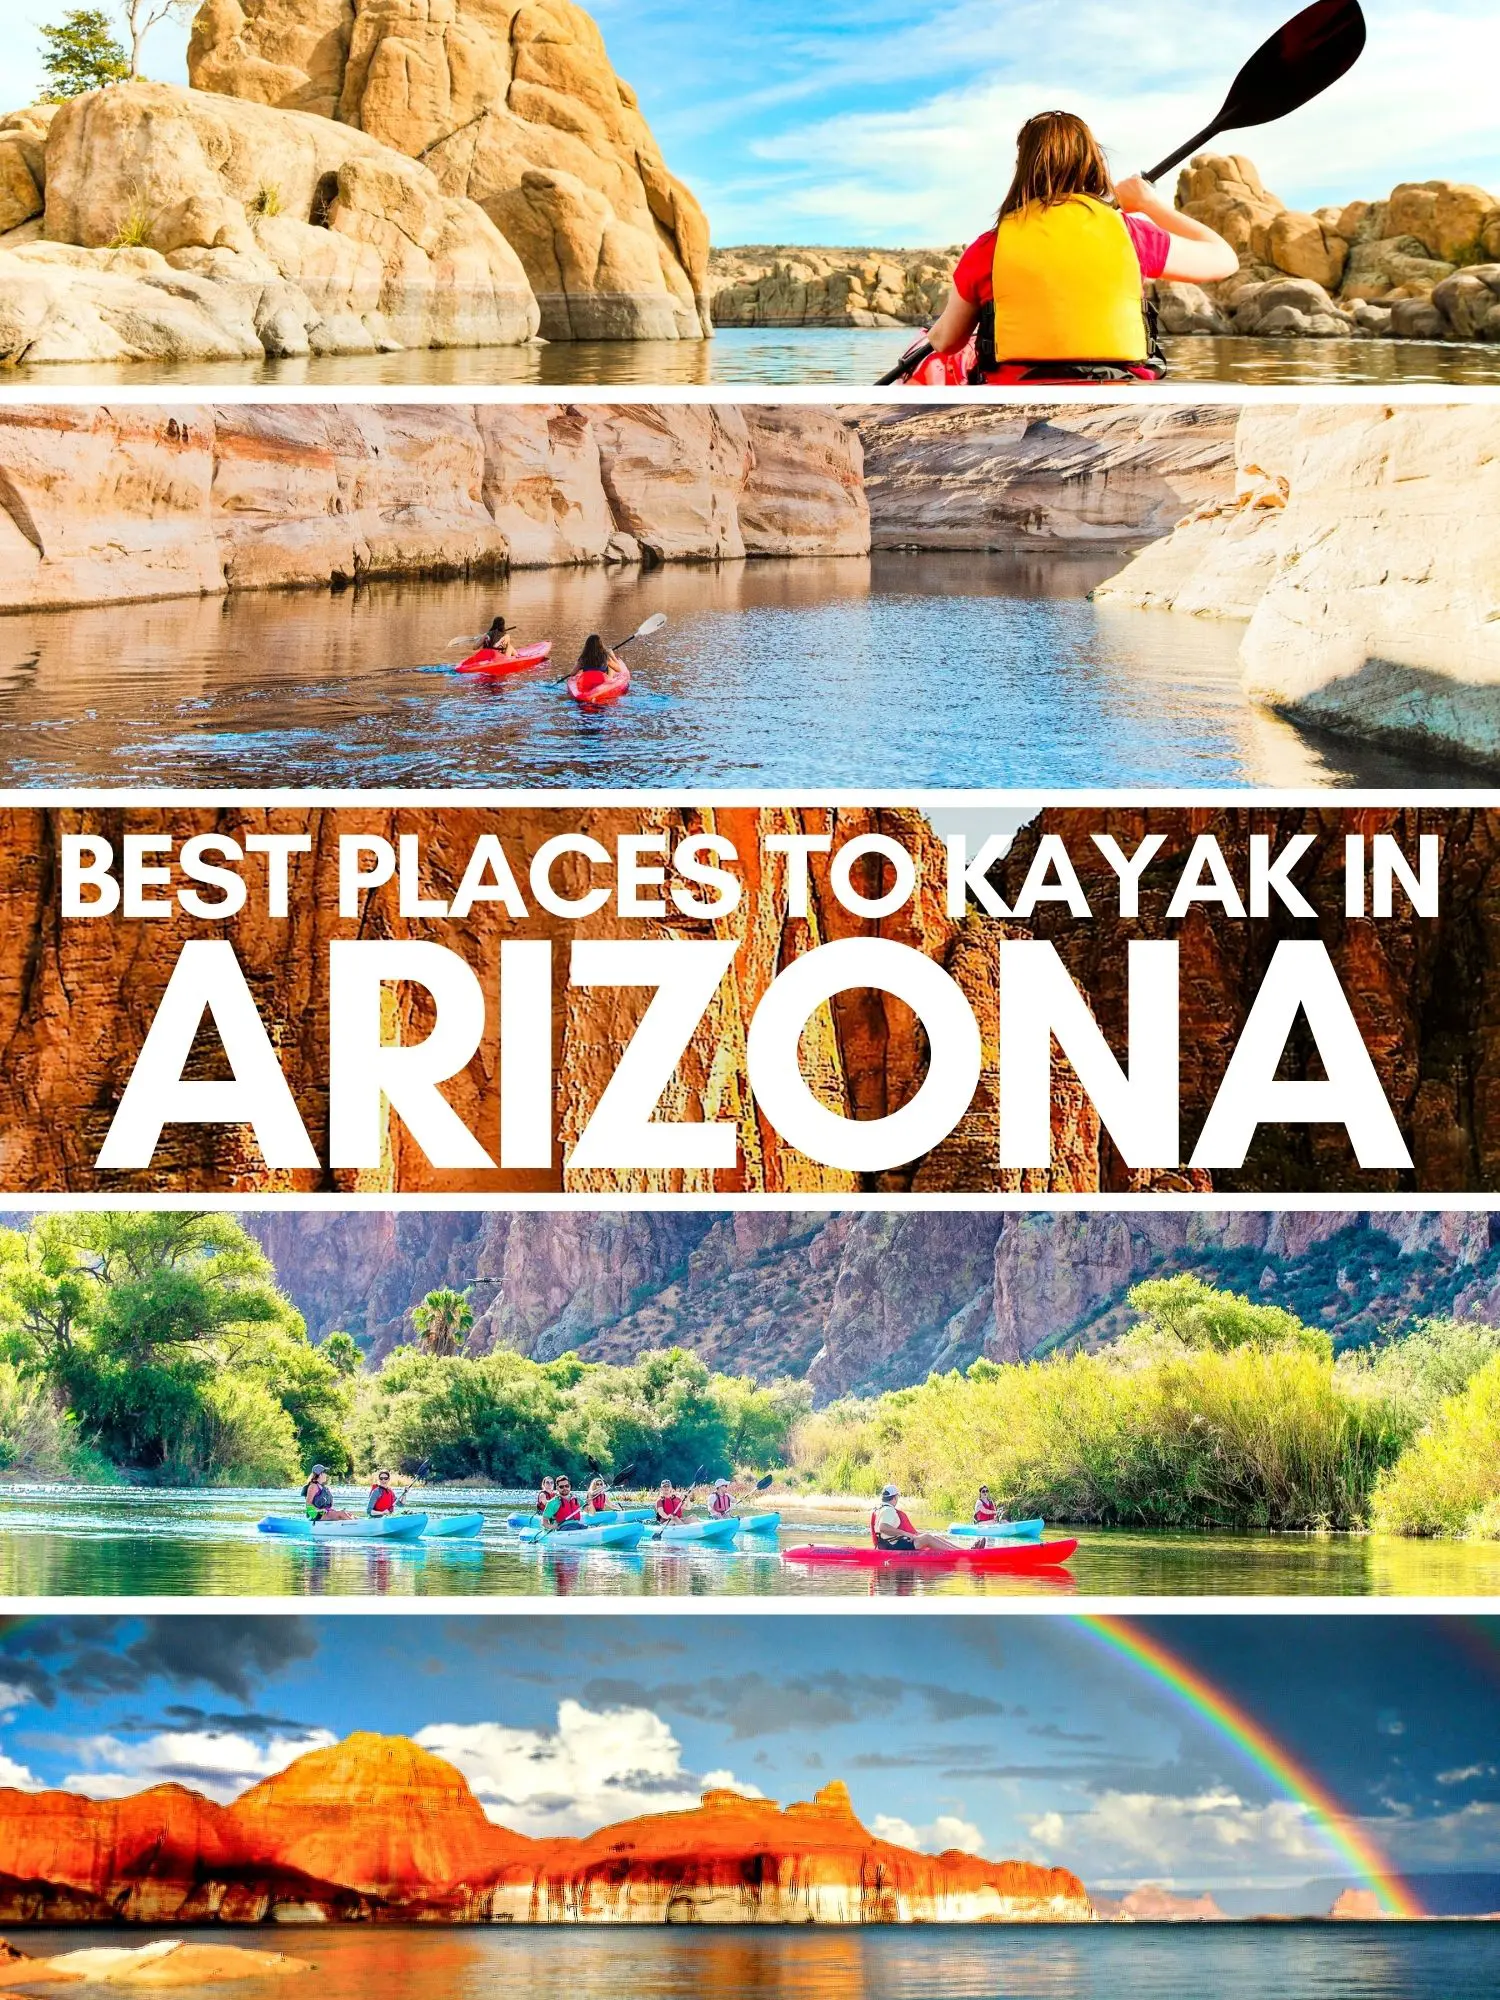 Kayaking in Arizona: beautiful, unique and a very different way to experience the most epic landscapes of the southwest. Famous sights and little known paddling spots around Arizona.